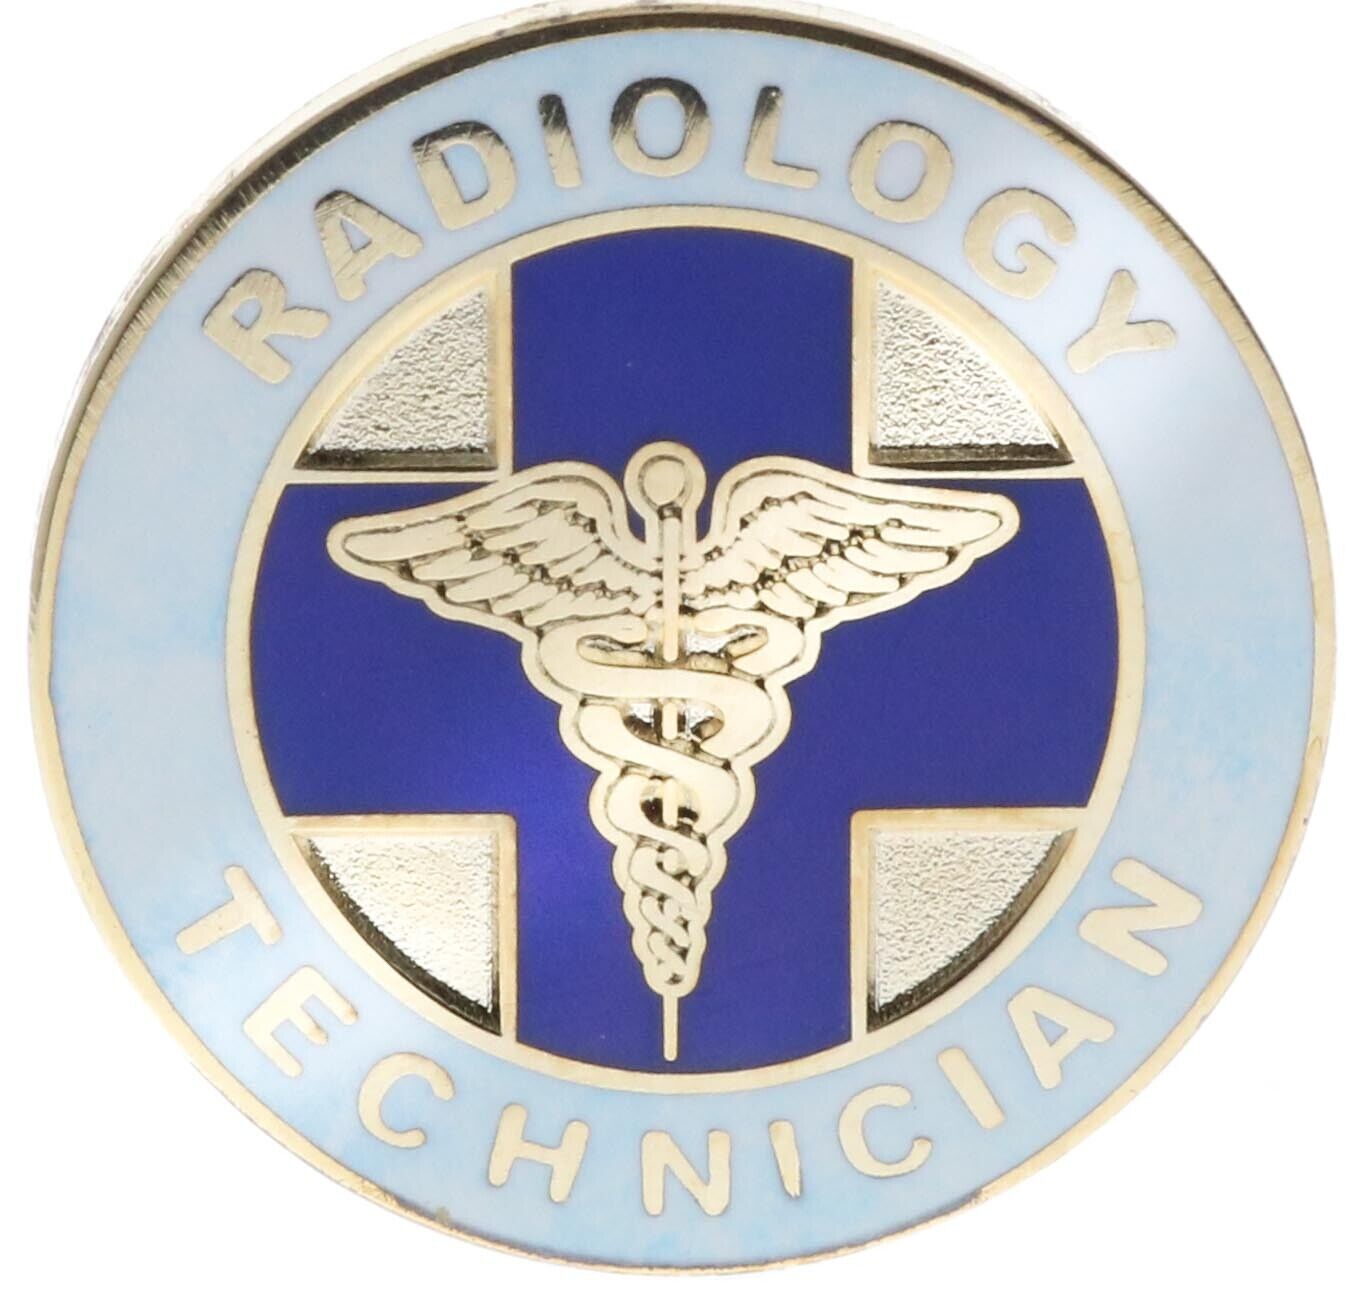 Caduceus Radiology Technician licensed Product Hat or Lapel Pin PMS1366 F3D32B